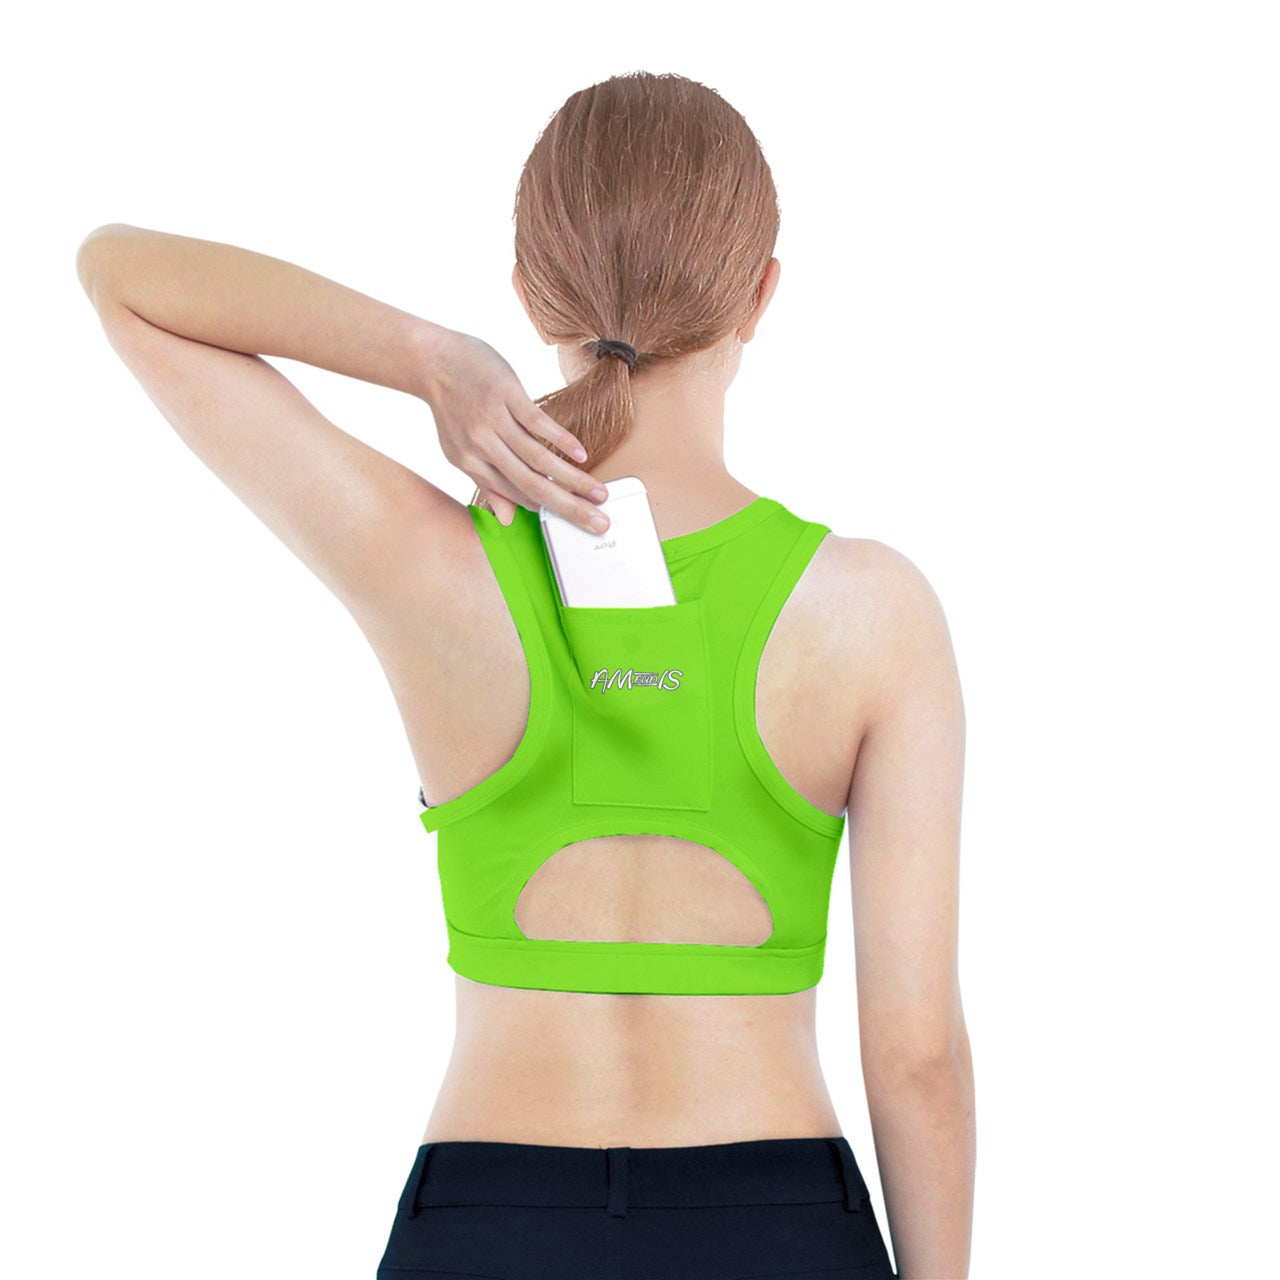 GREEN Am&Is Activewear Sports Bra With Pocket - 6 colors - women's sports bra at TFC&H Co.